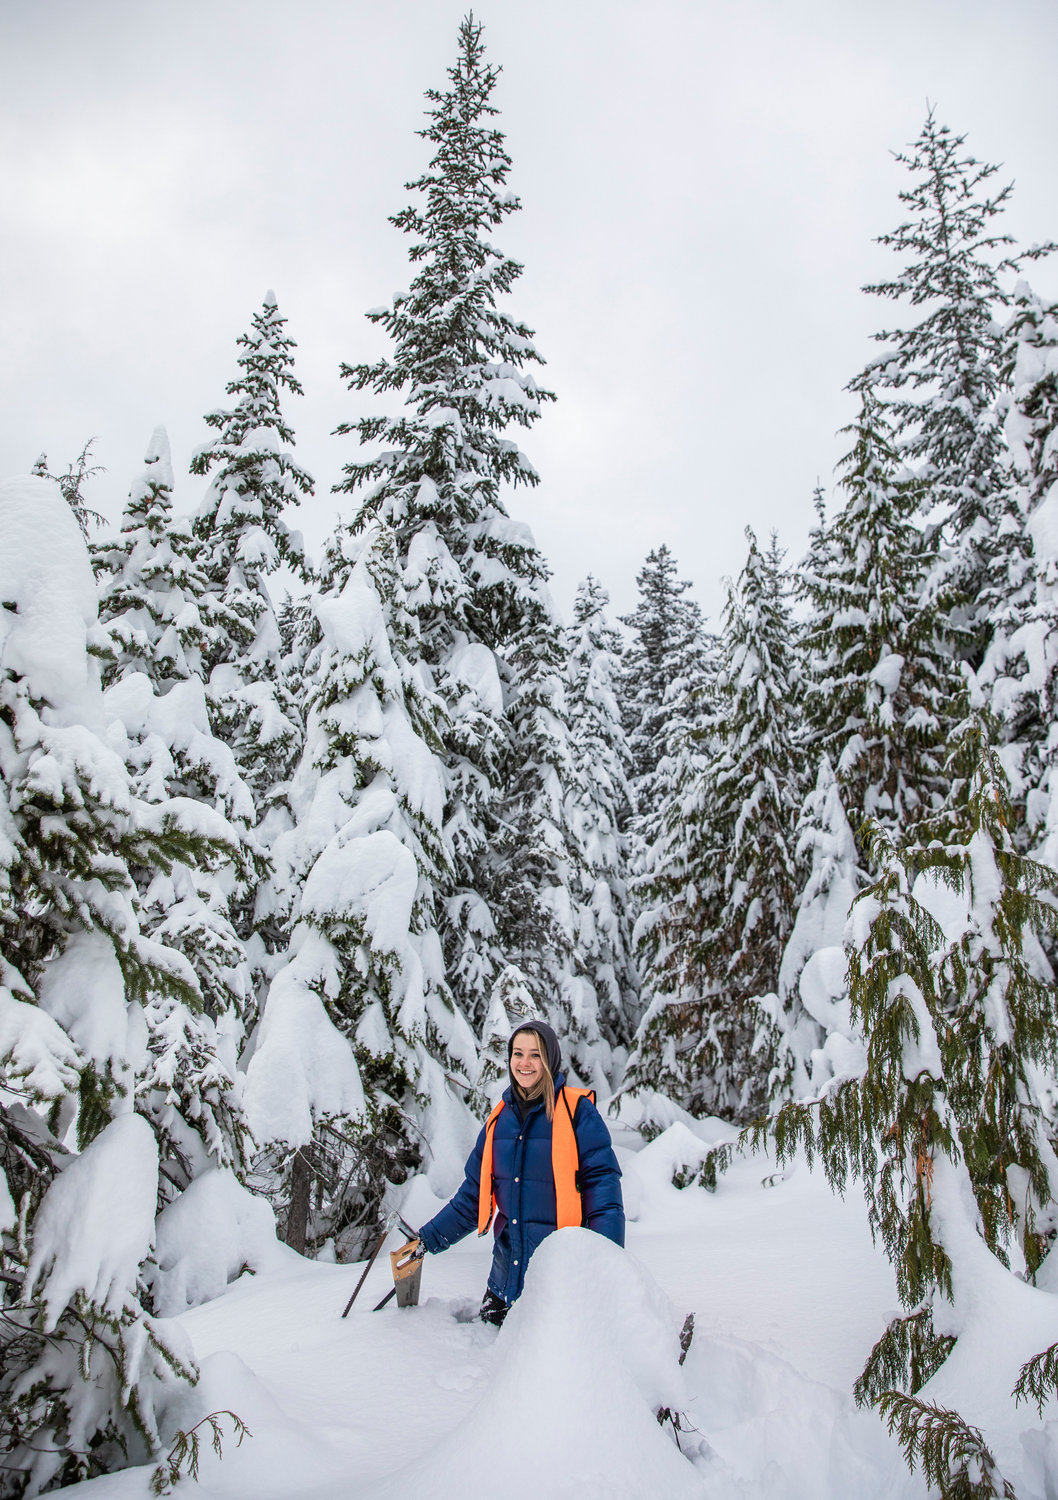 Reporter Isabel Vander Stoep smiles while walking through snow with saws in hand off Forest Road 1284 while looking for a spruce tree to cut down in Lewis County.